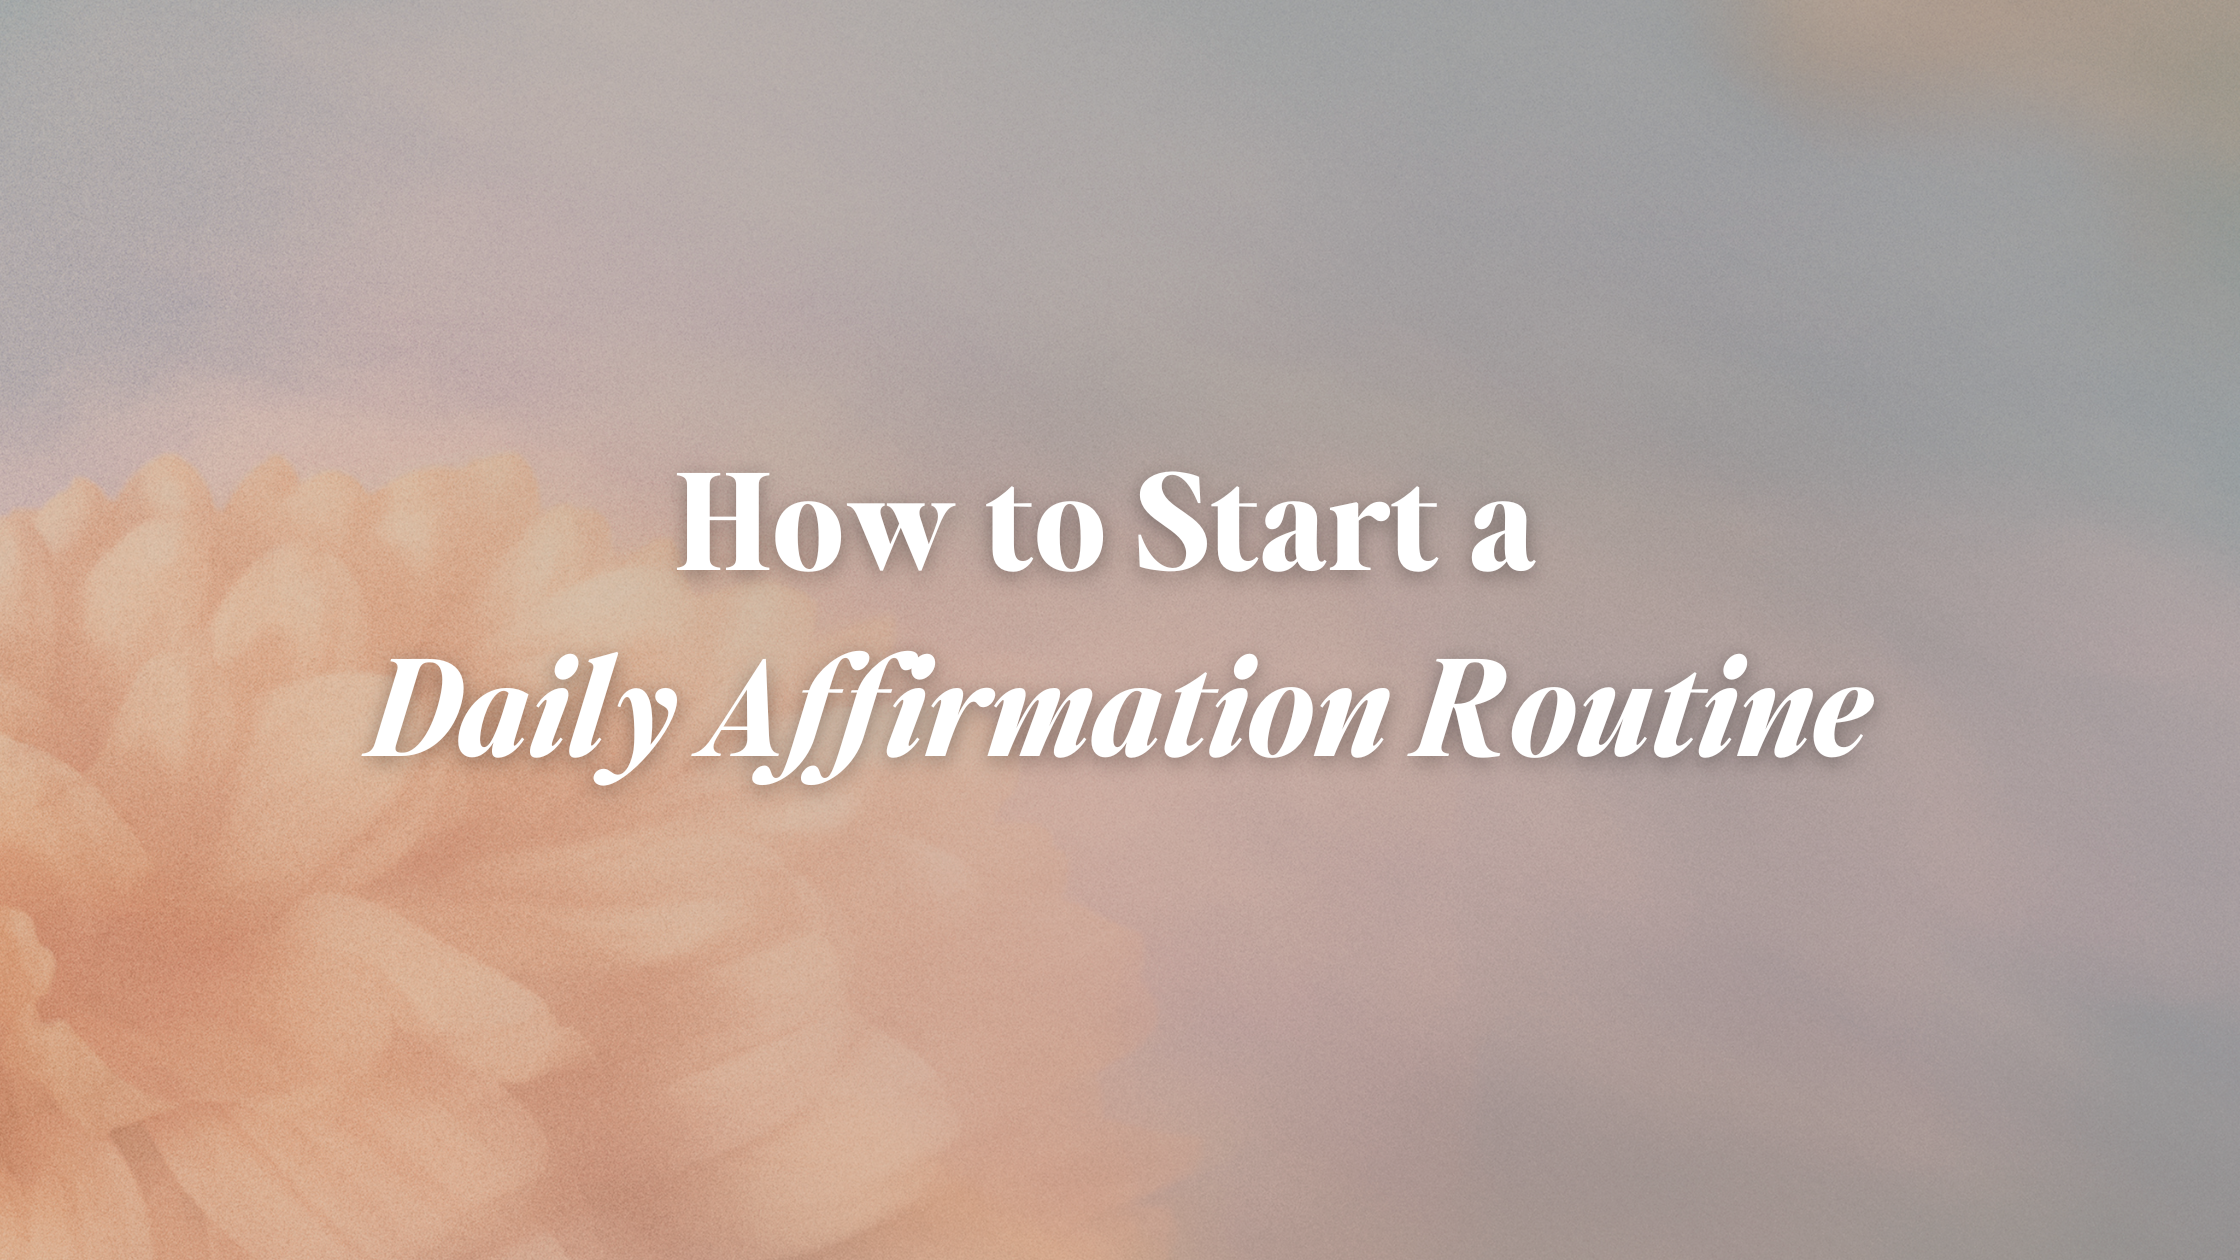 How to Start a Daily Affirmation Routine